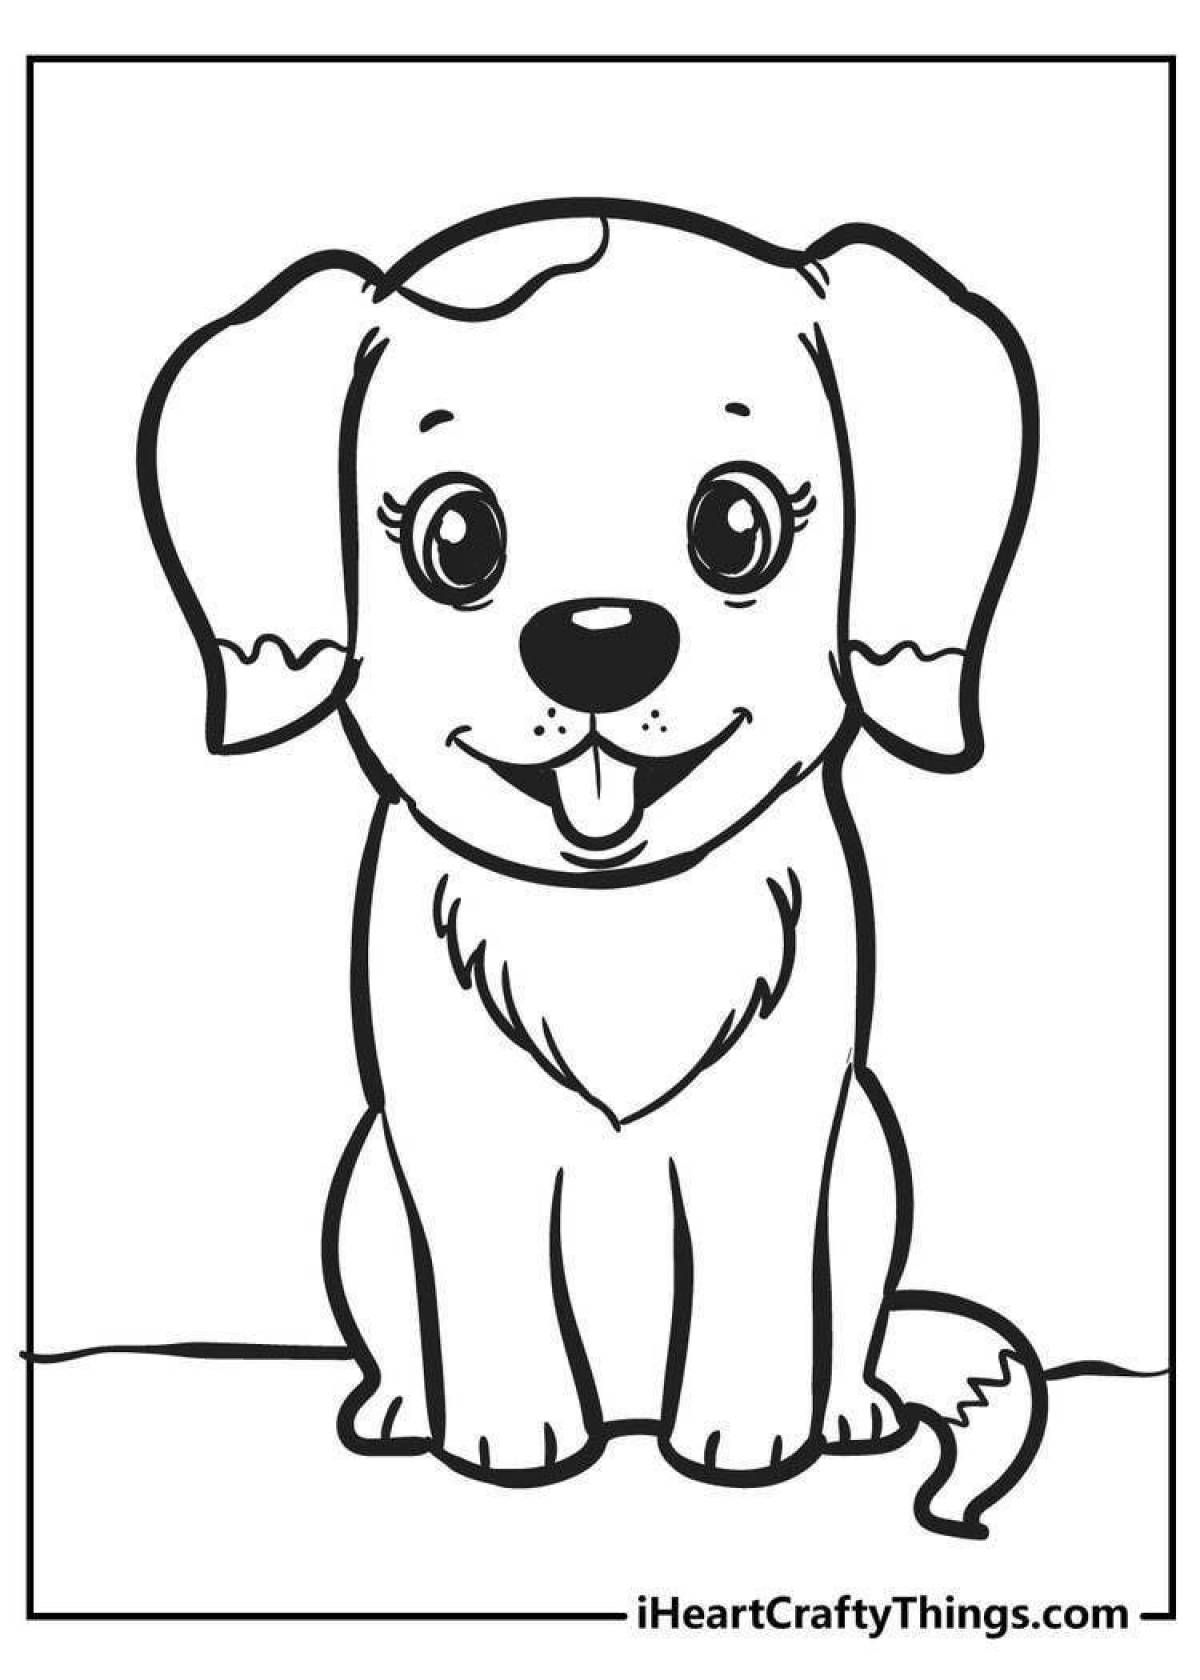 Curious cute dog coloring book